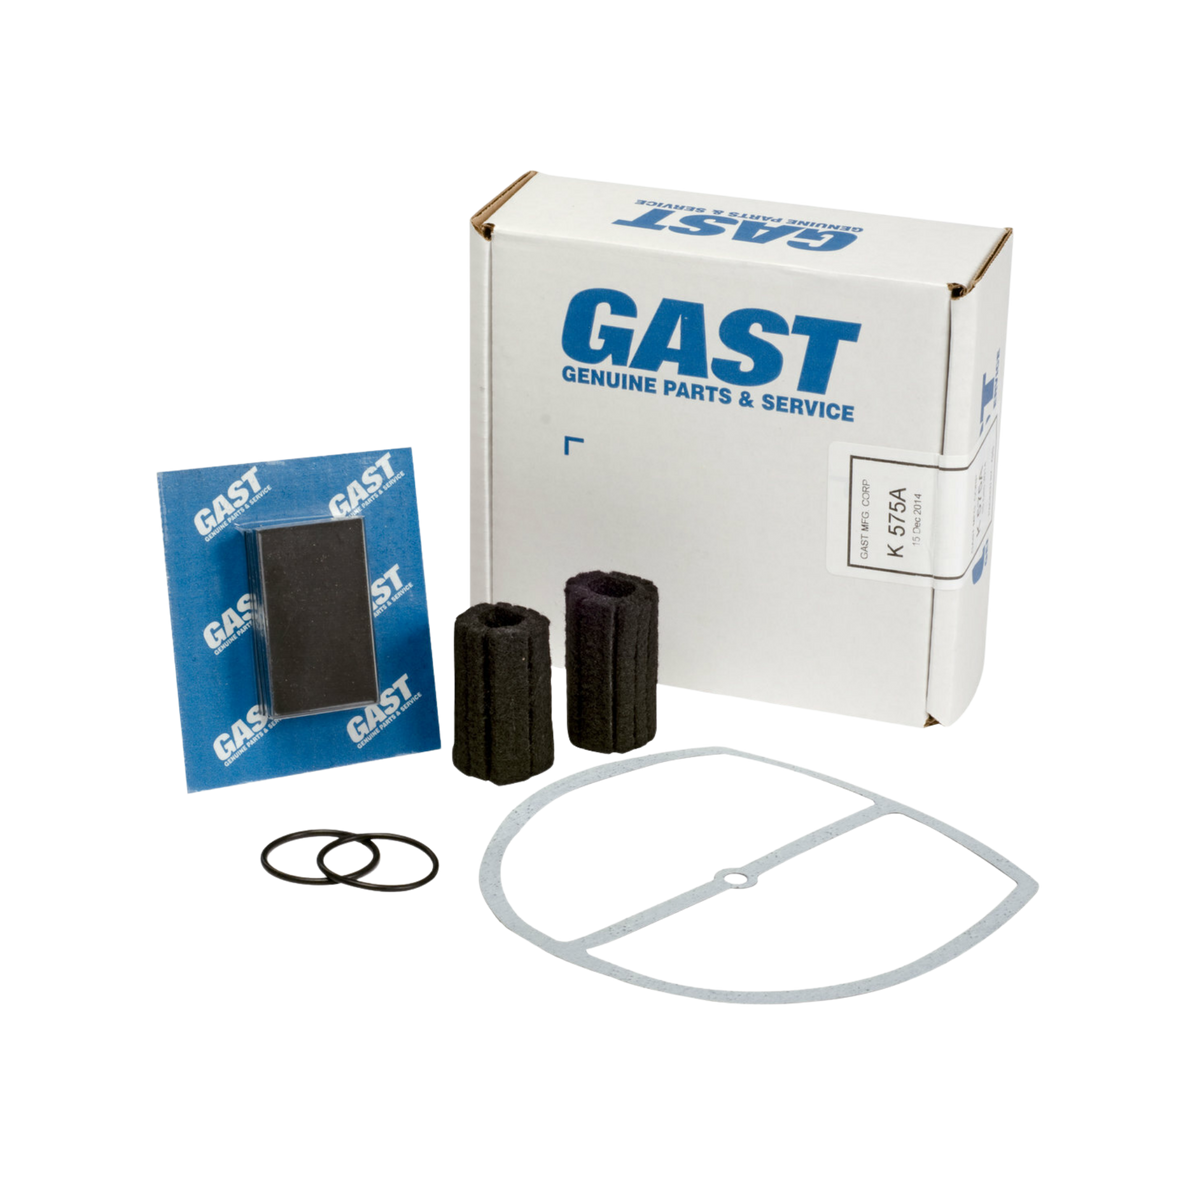 contents of a repair kit including vanes, gaskets, o-rings, filters, and a white Gast box